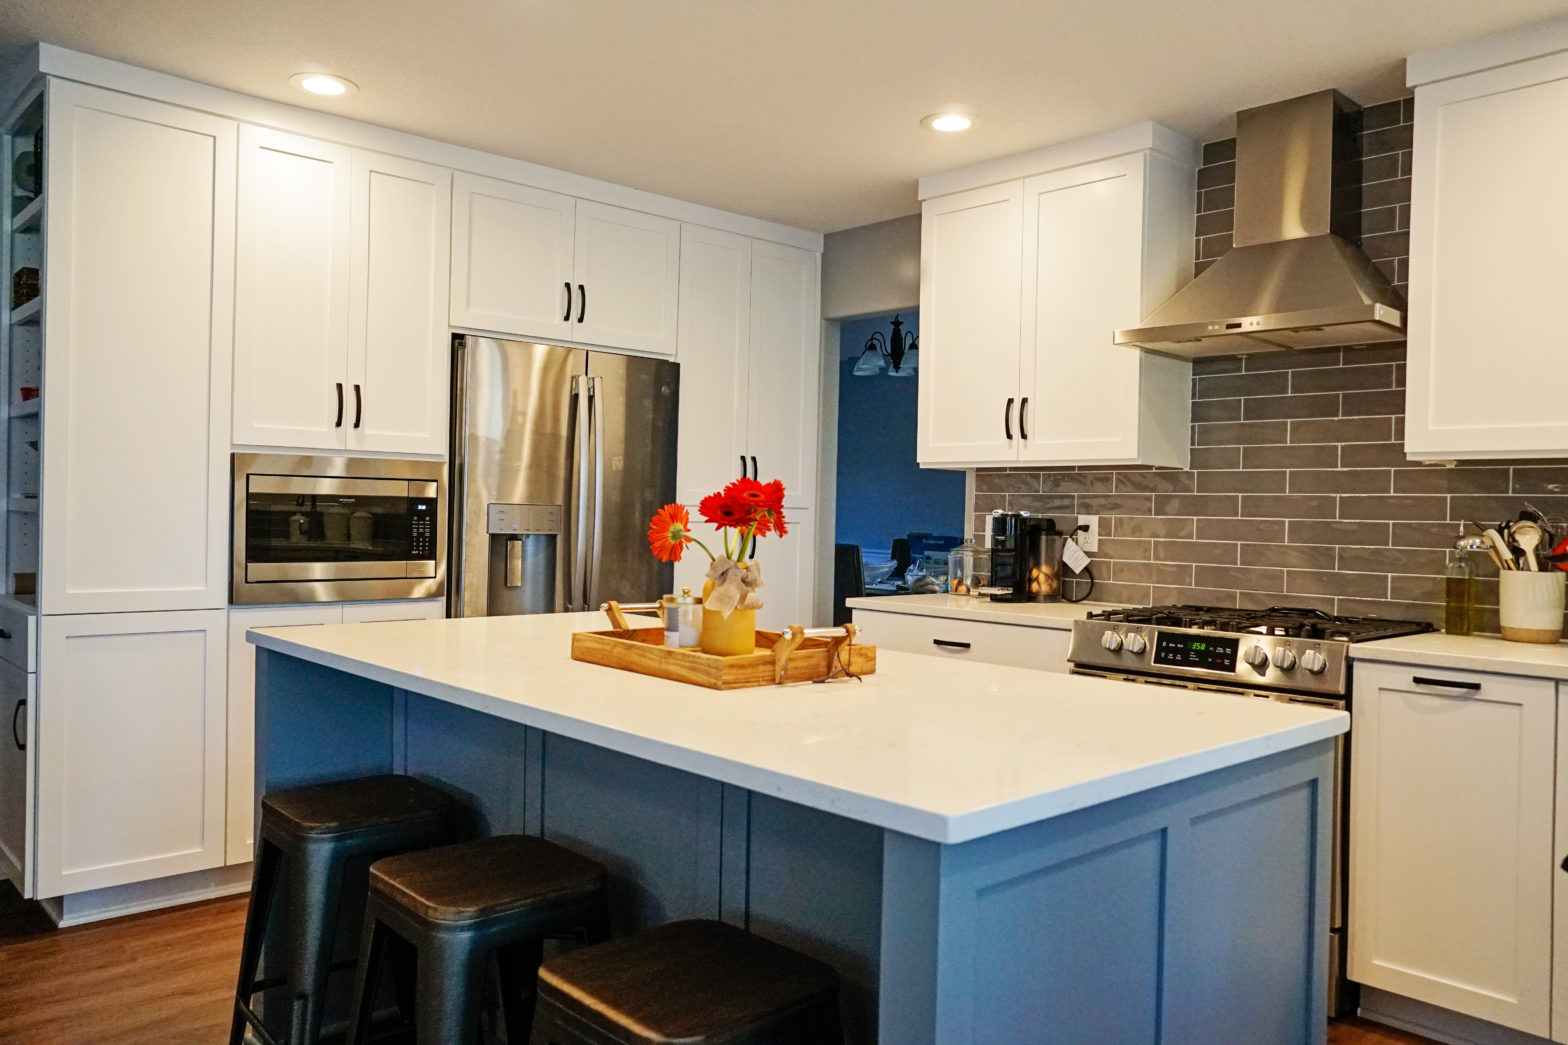 Hire Professional Project Managers for Your Kitchen Remodel, Bath Remodel, or Laundry Room Remodel.